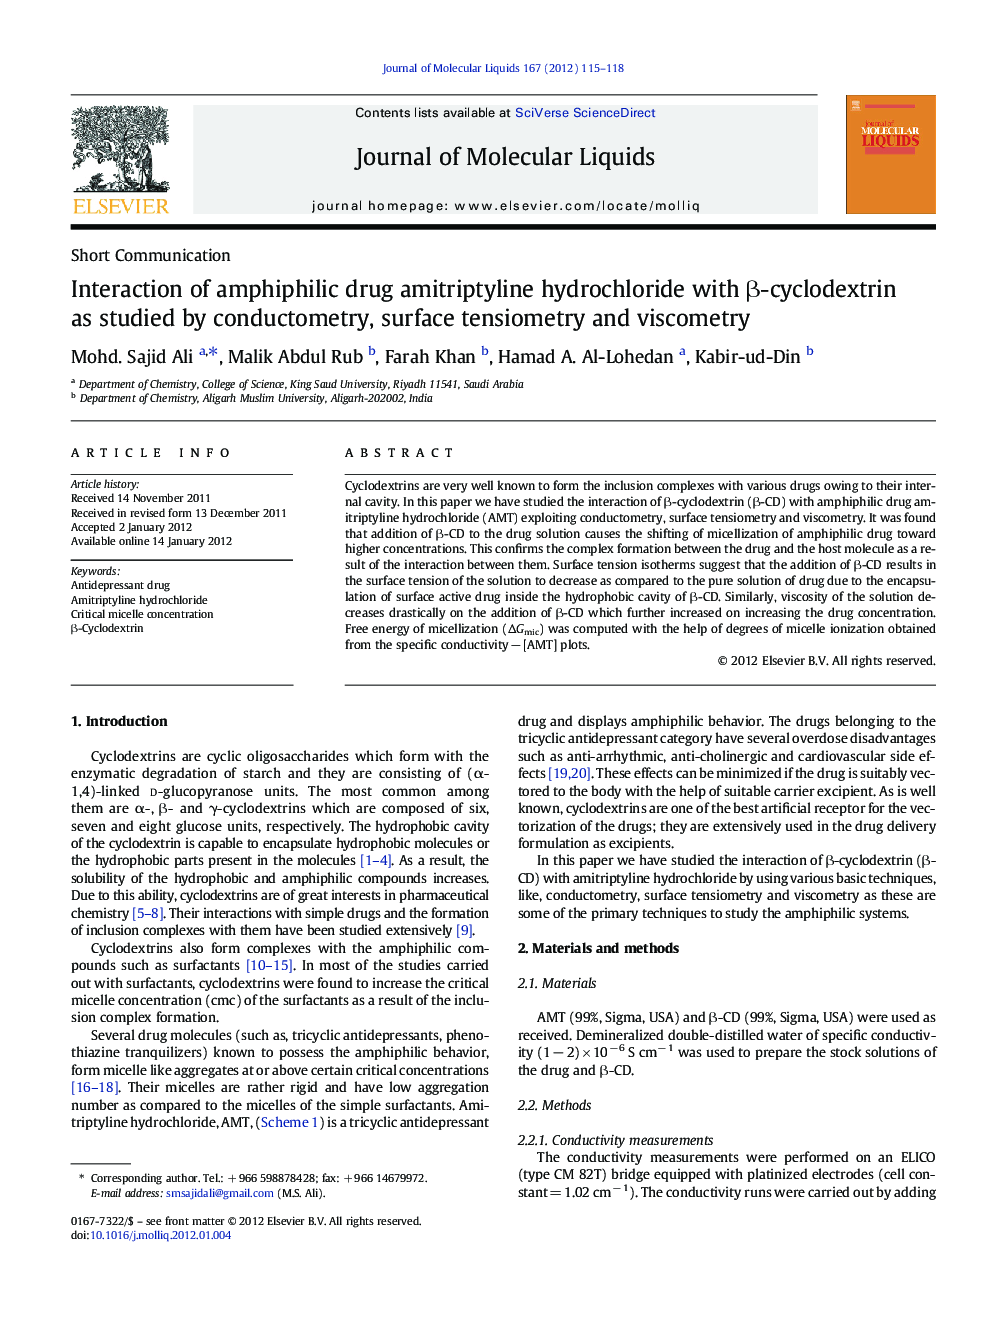 Interaction of amphiphilic drug amitriptyline hydrochloride with Î²-cyclodextrin as studied by conductometry, surface tensiometry and viscometry